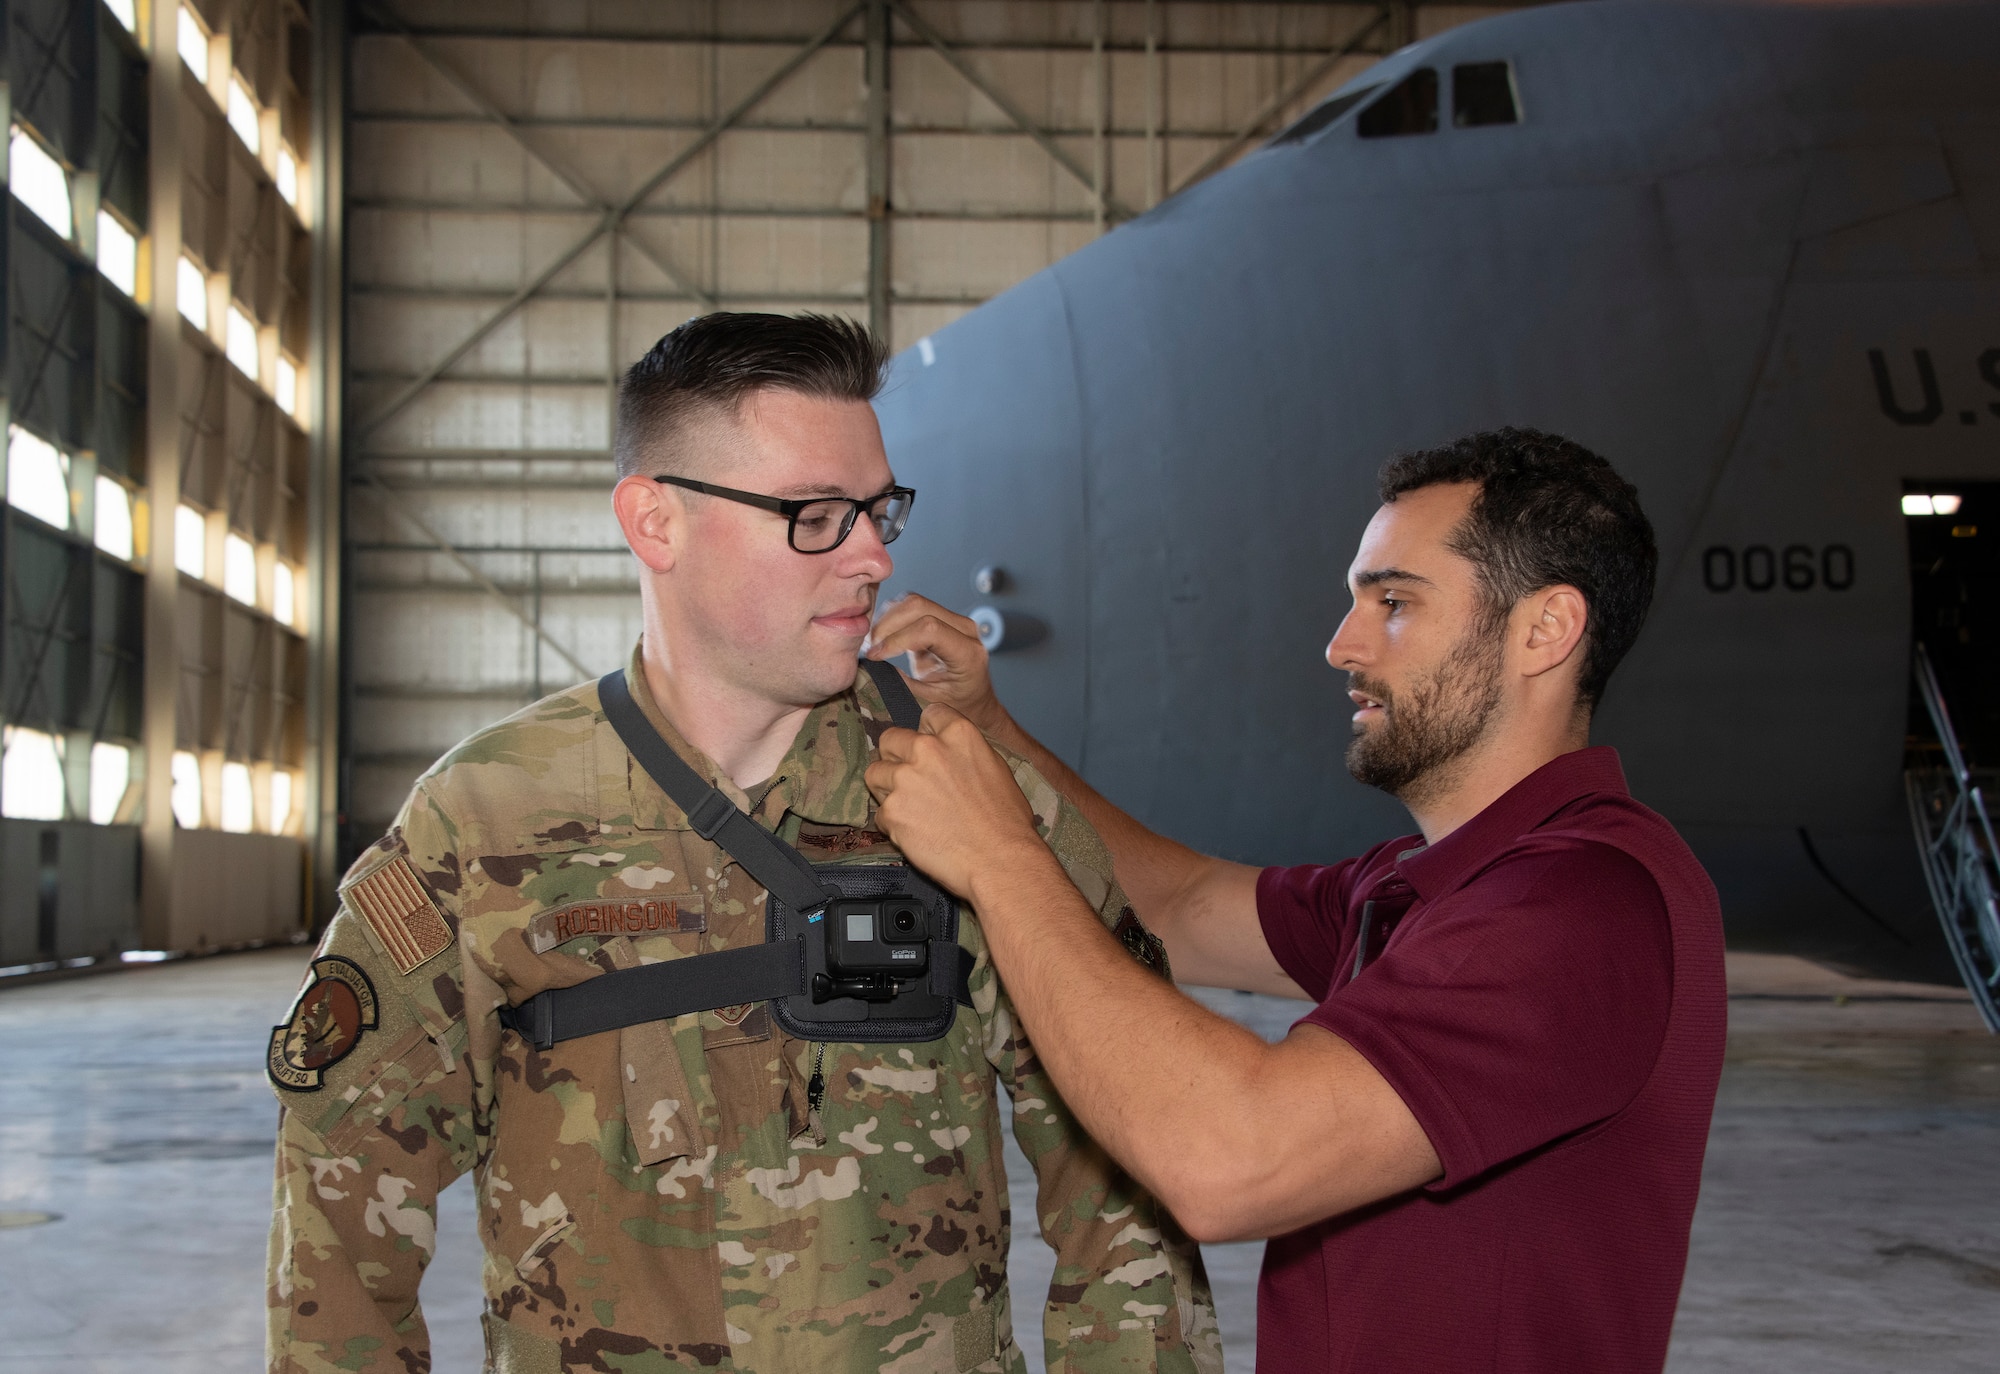 Joe Connolly, head of product for Sketchbox3D, adjusts the straps of a GoPro camera on U.S. Air Force Staff Sgt. Kevin Robinson, 22nd Airlift Squadron loadmaster evaluator Sept. 6, 2019, at Travis Air Force Base, California. The 22nd AS is partnering with Sketchbox3D to develop virtual reality training on C-5M Super Galaxy emergency escape slide egress procedures. (U.S. Air Force photo by Heide Couch)